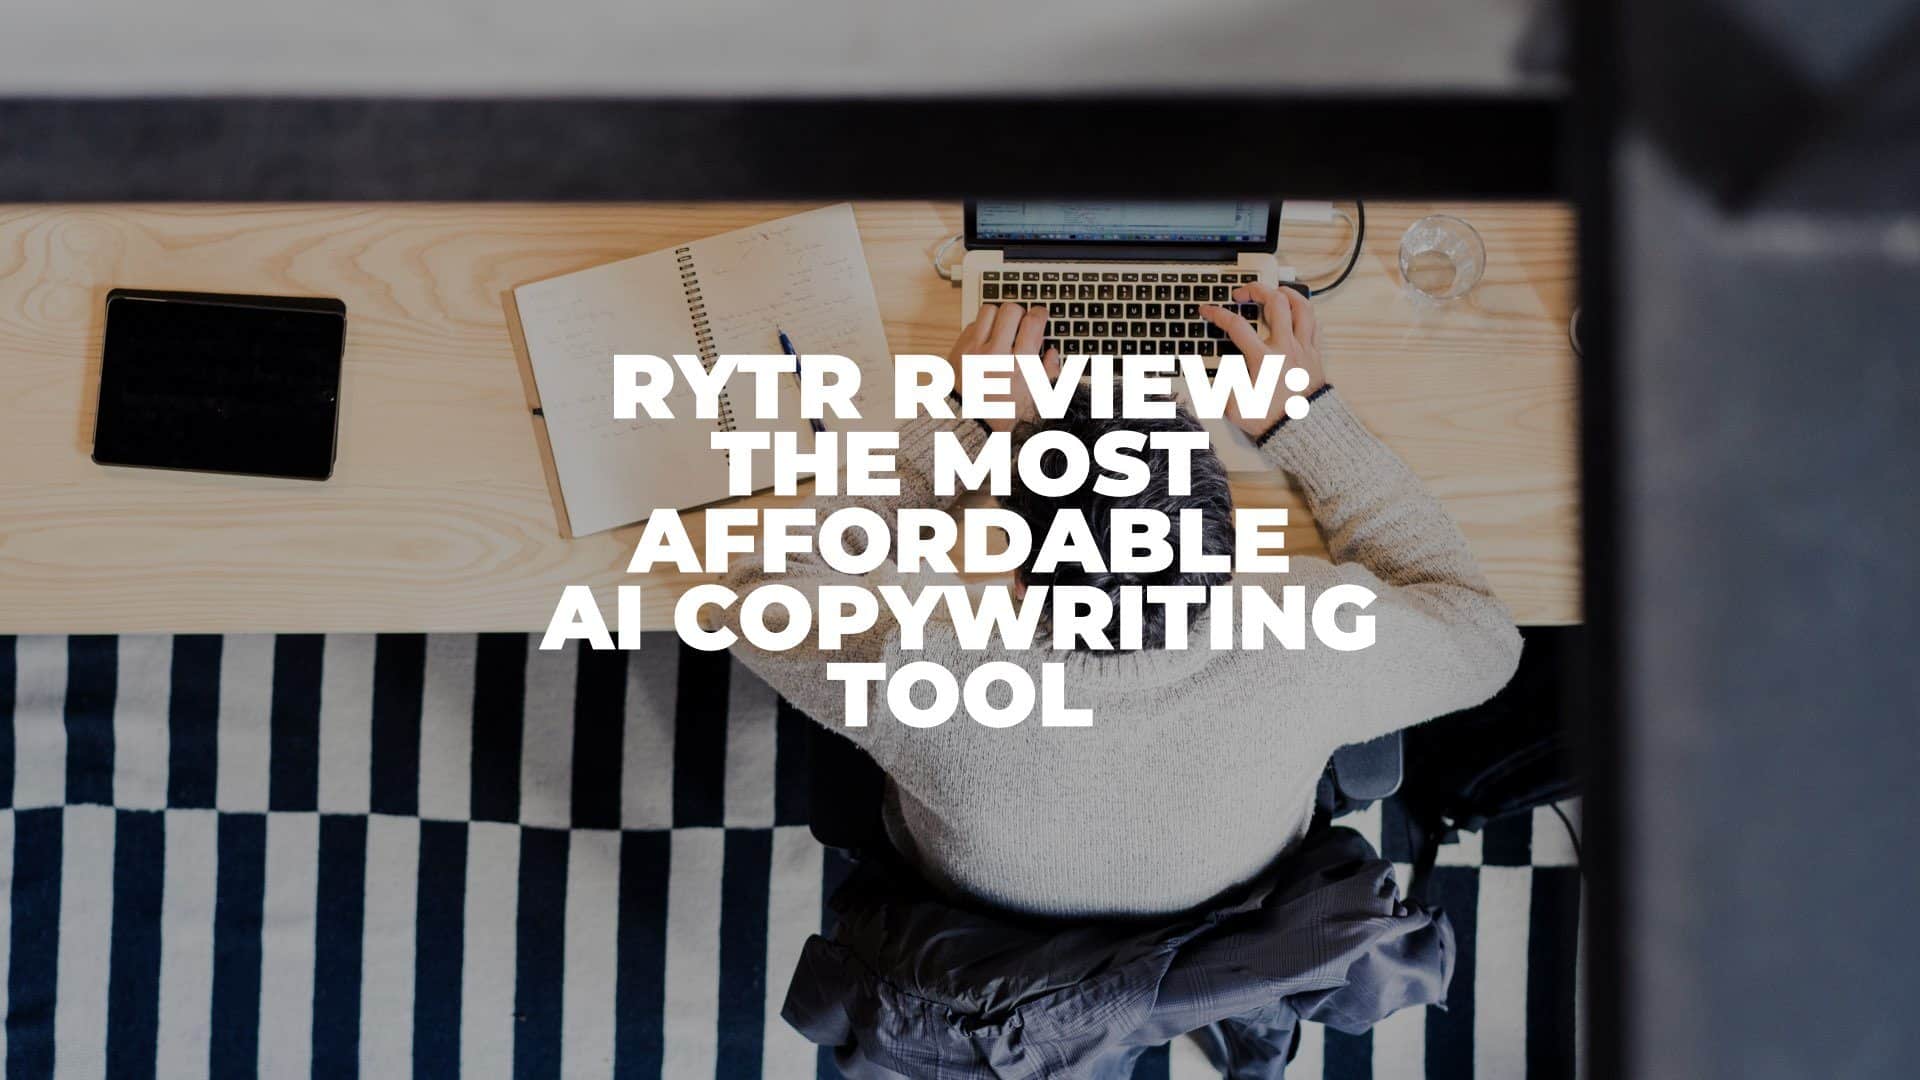 Rytr Review - Featured Image